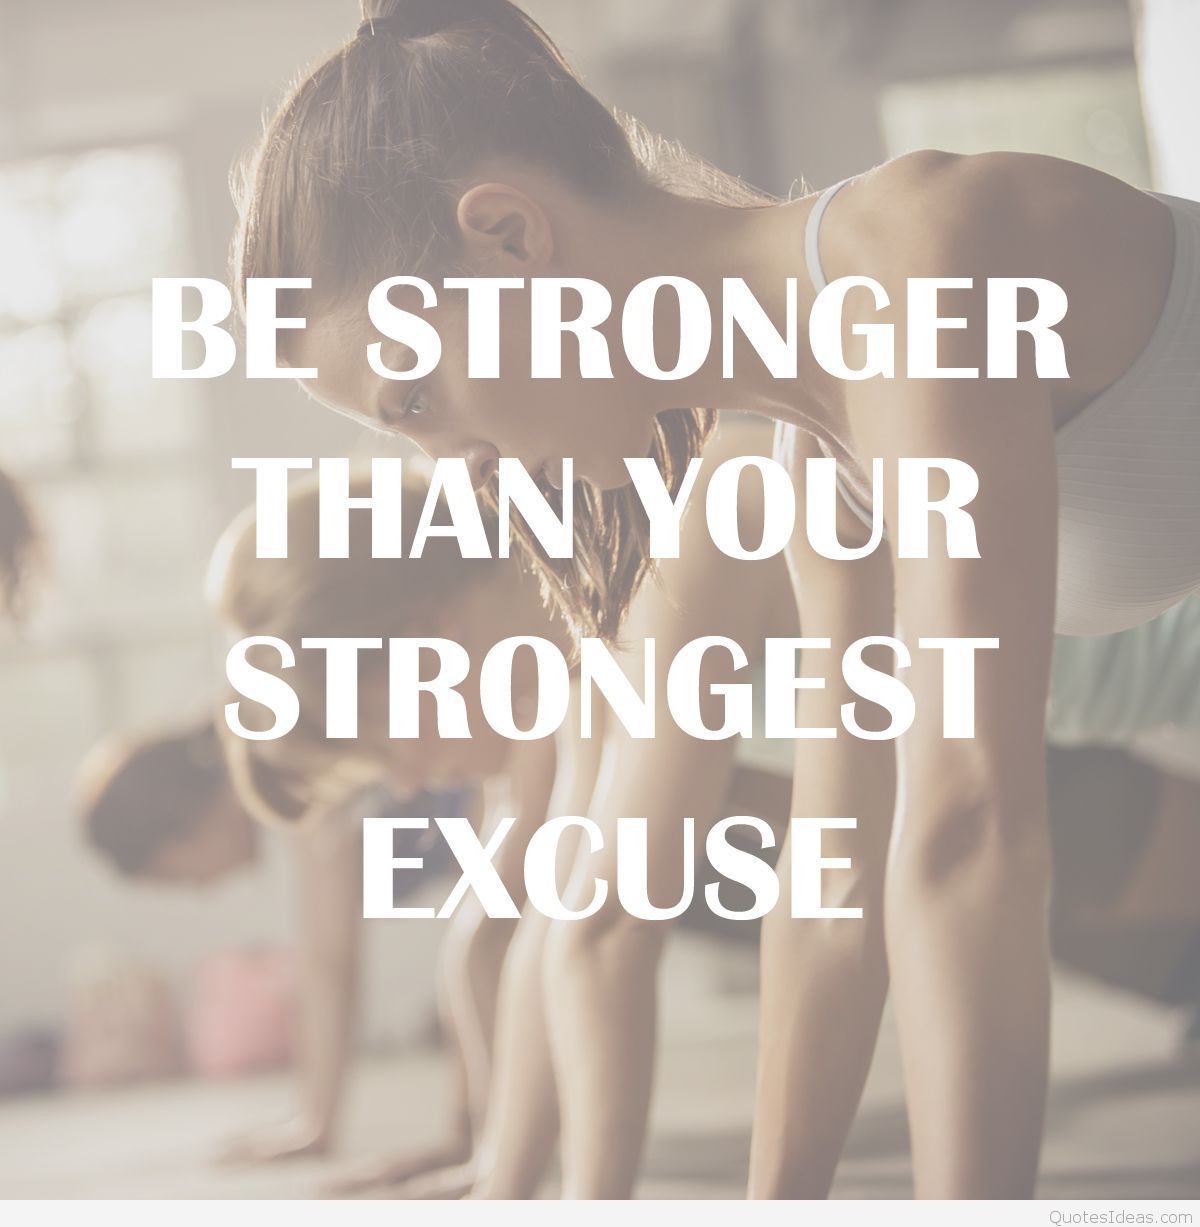 Fitness bodybuilding workouts quotes .quotesideas.com